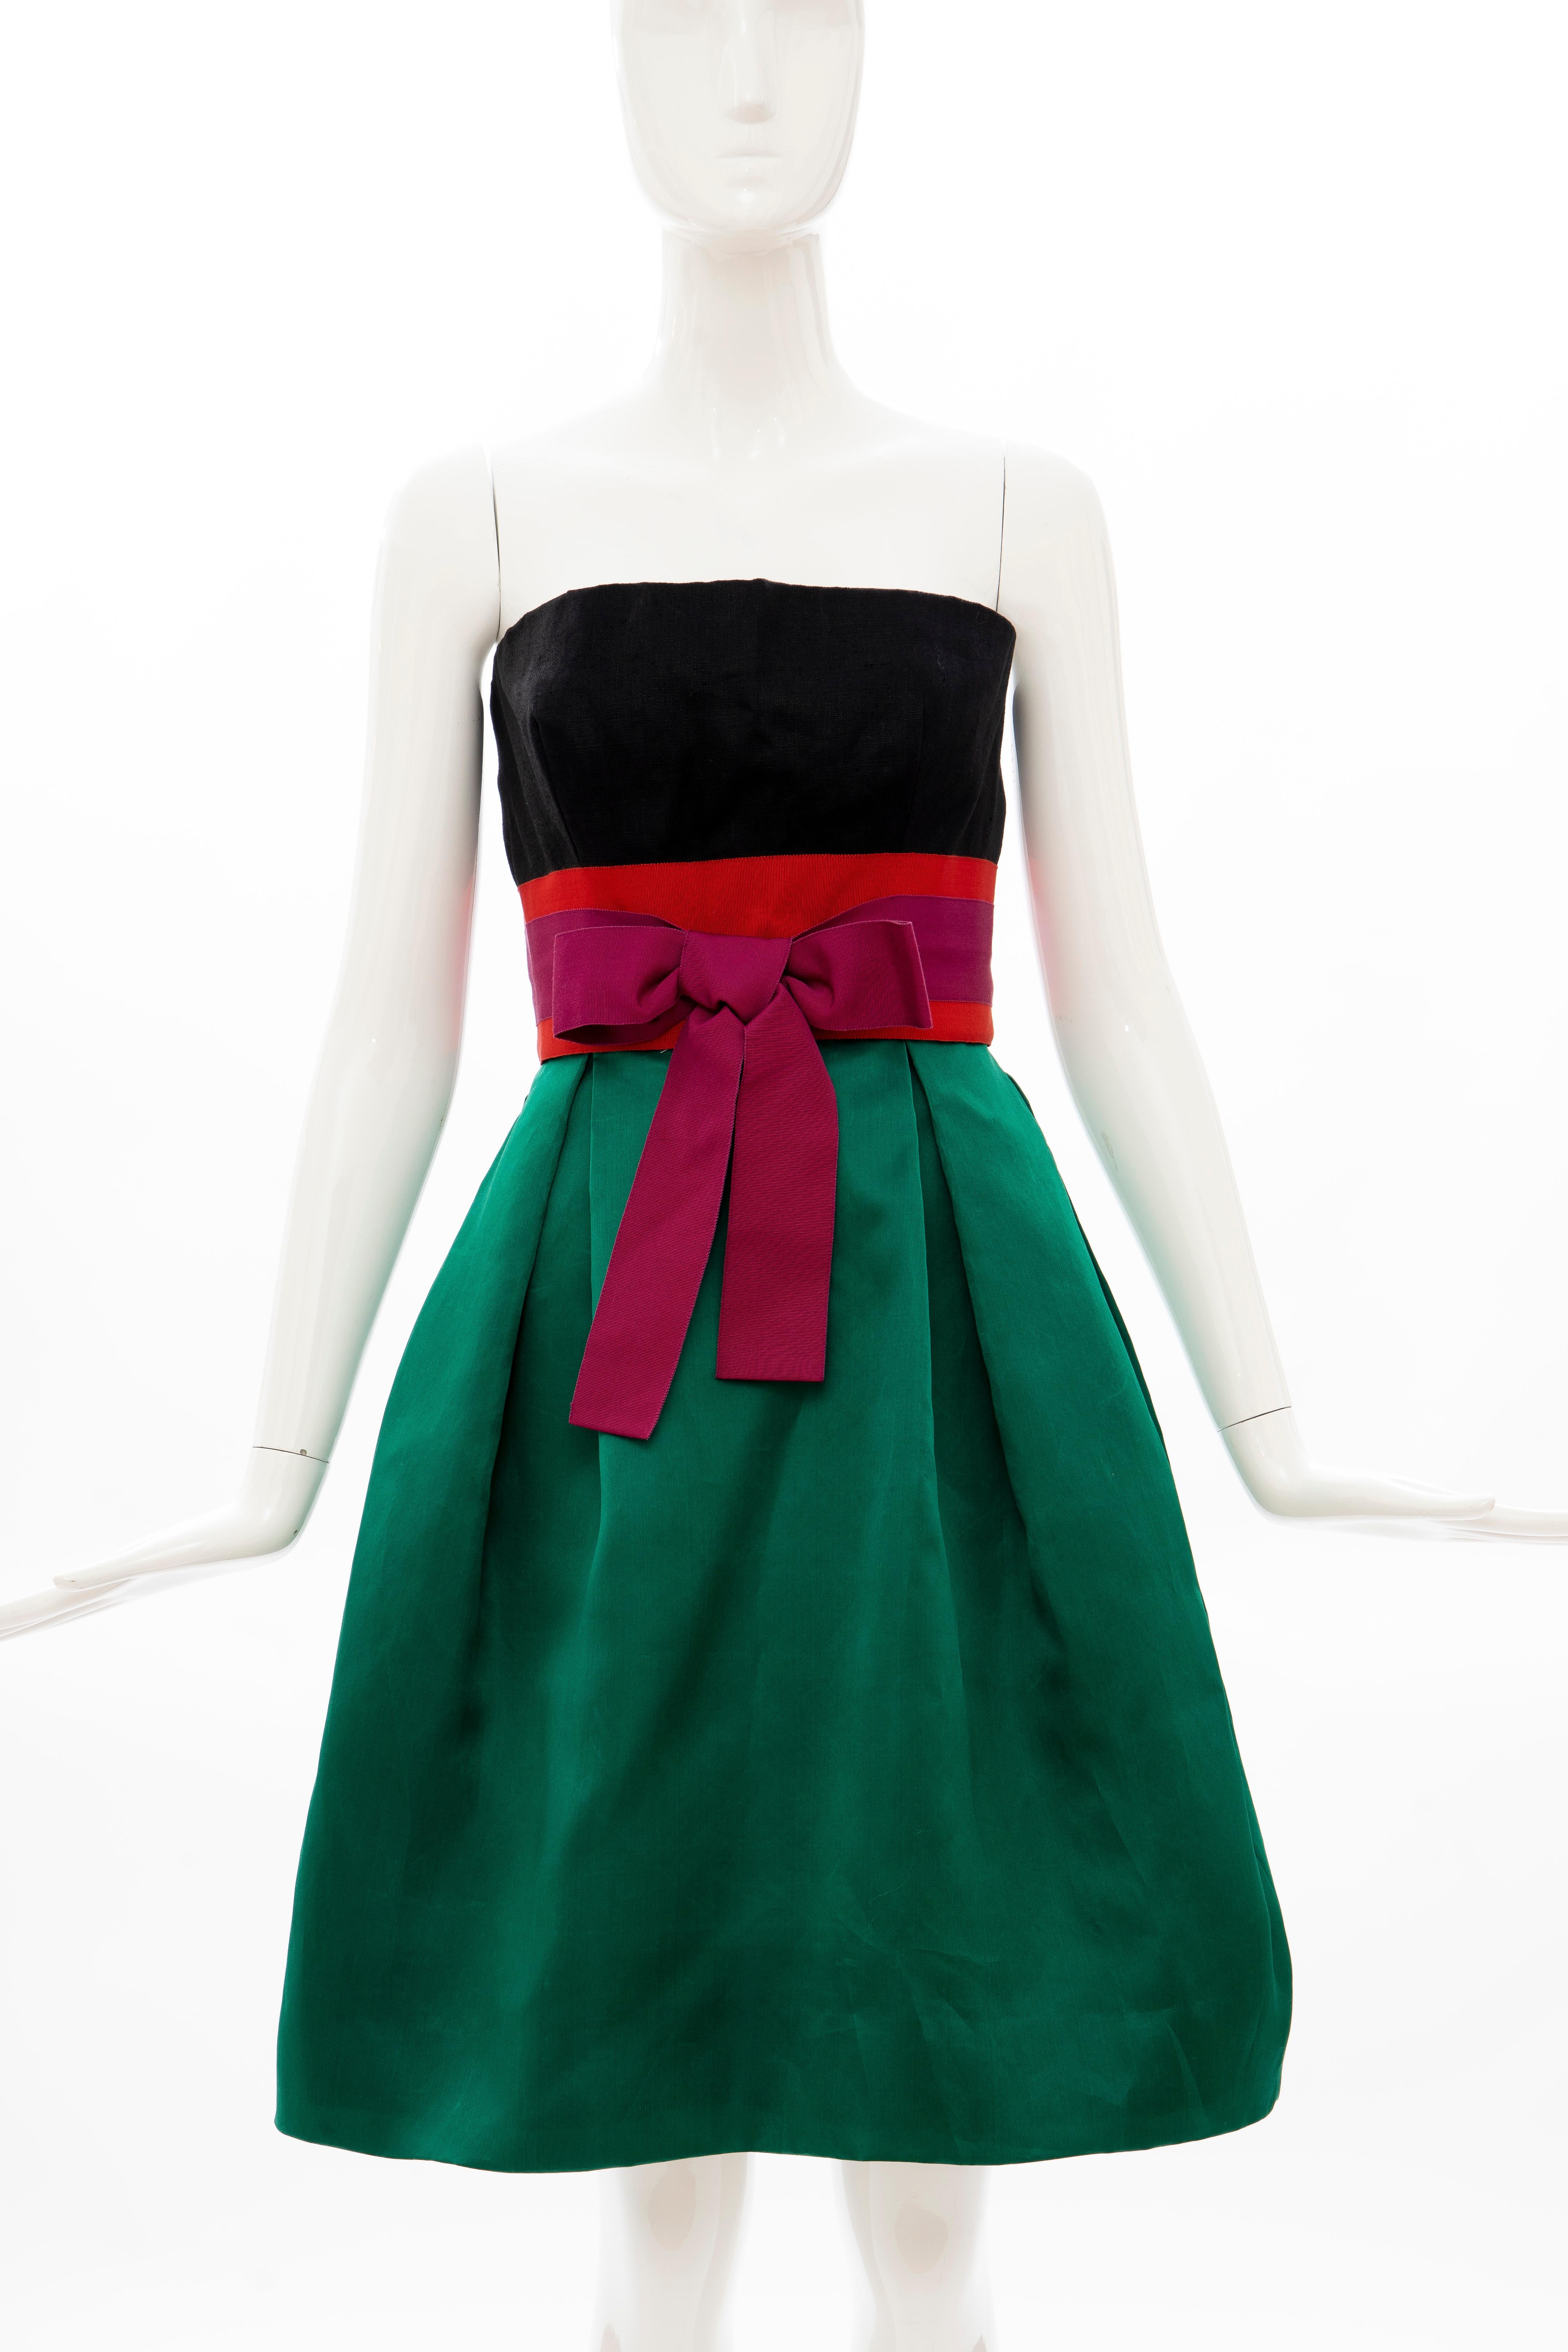 Bill Blass Matisse Inspired Embroidered Sequined Dress Ensemble, Spring 1988 In Good Condition For Sale In Cincinnati, OH